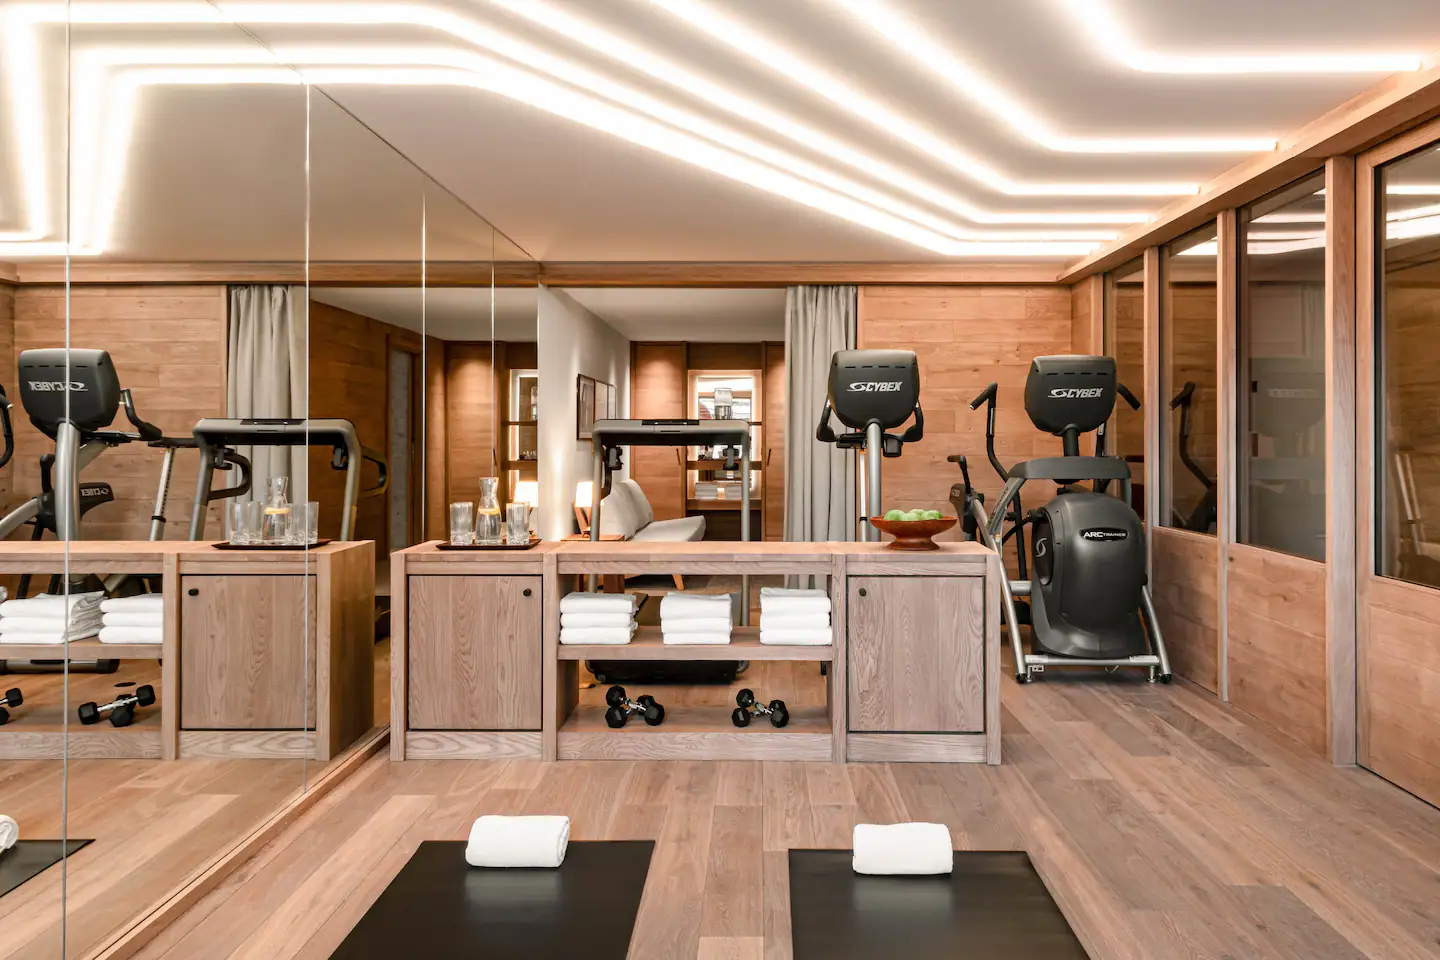 Fitness corner to stay active and energized.